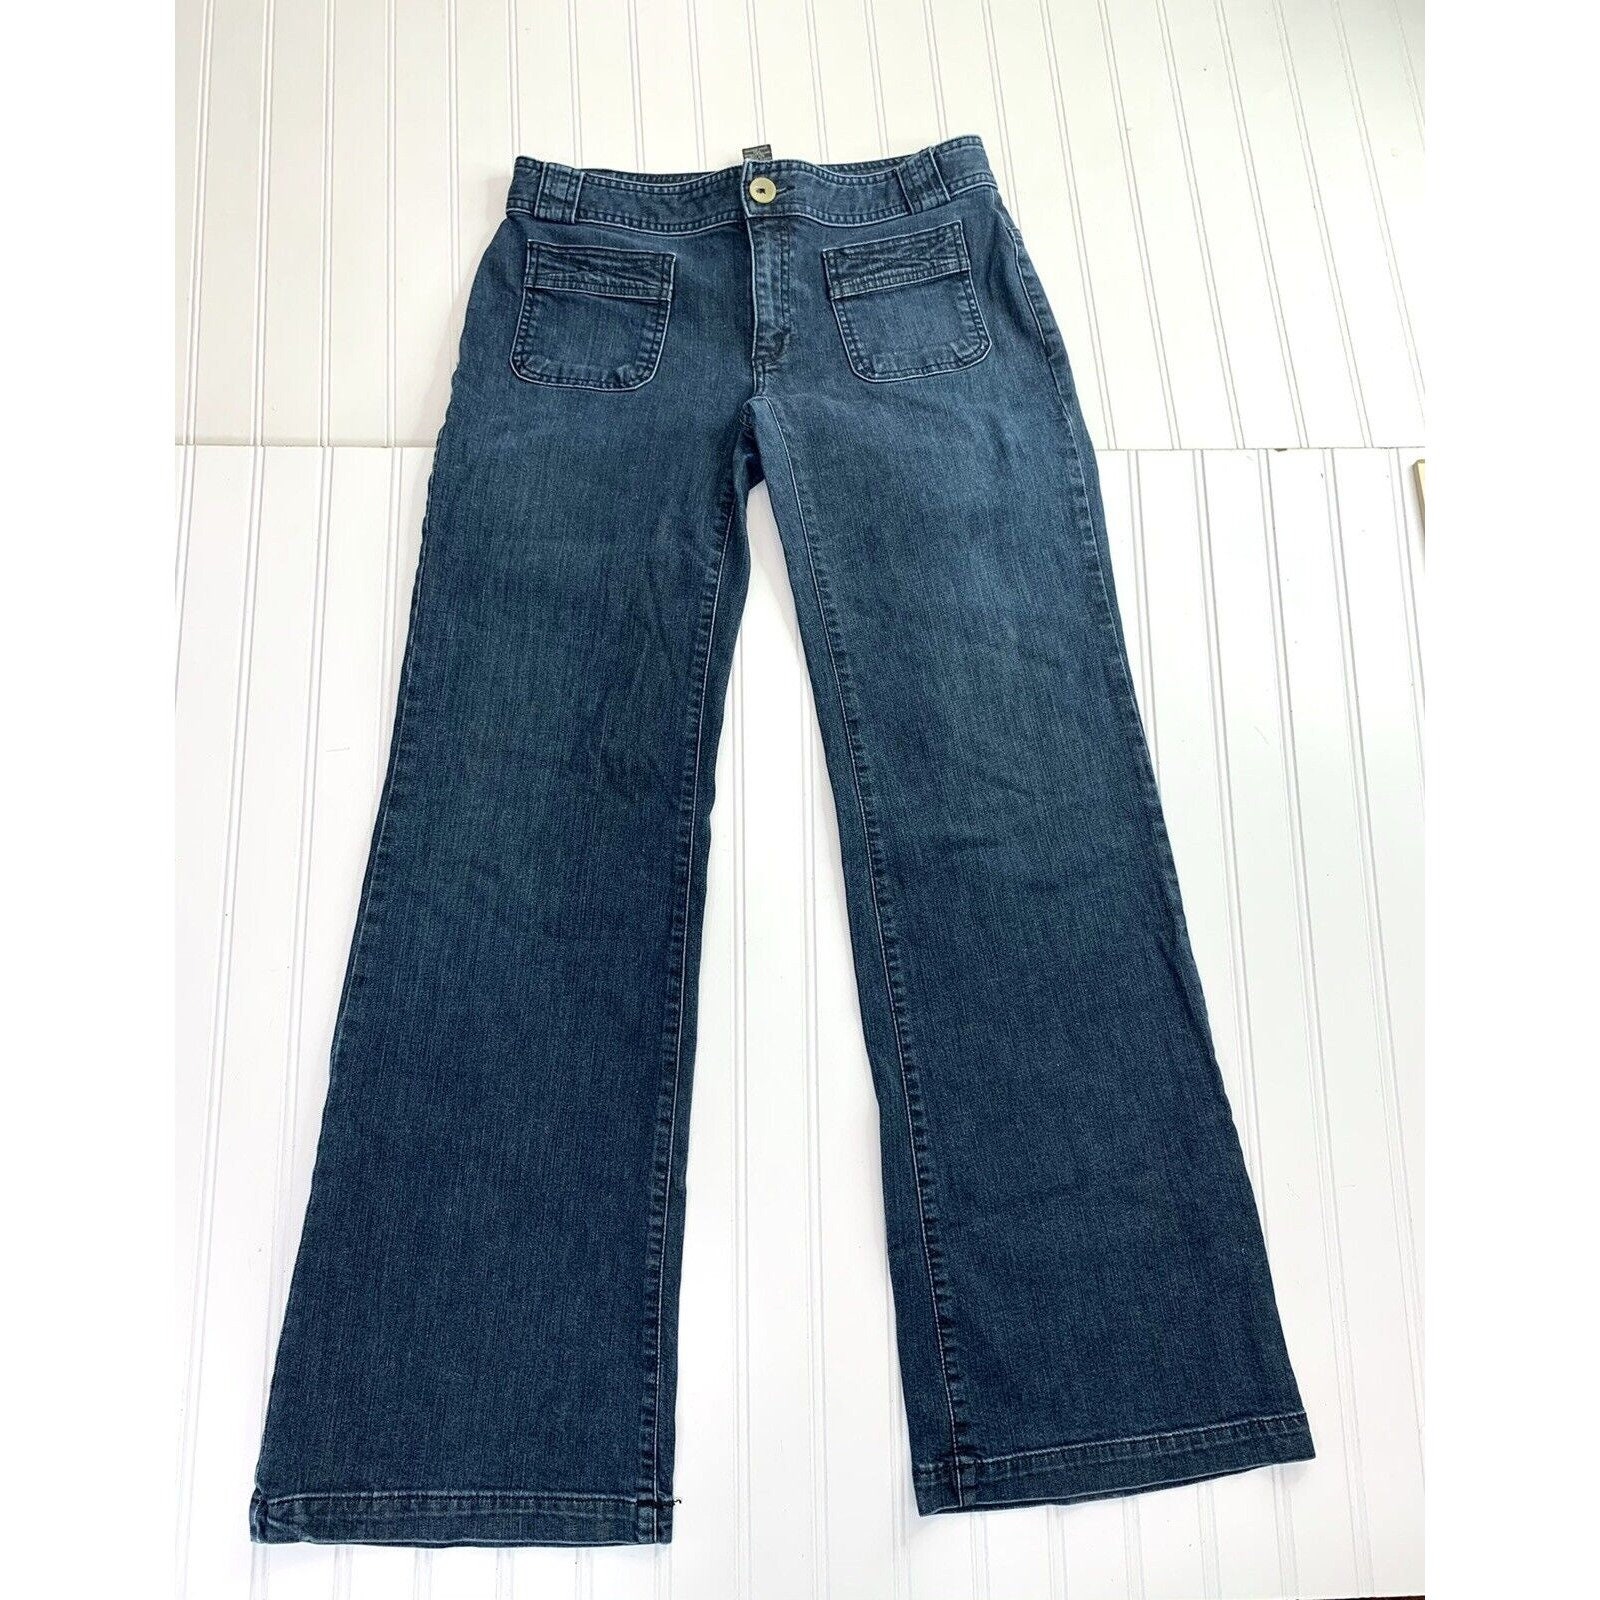 Gap Flare Jeans Vintage Distressed Jeans Womens Flares Sz 34/30